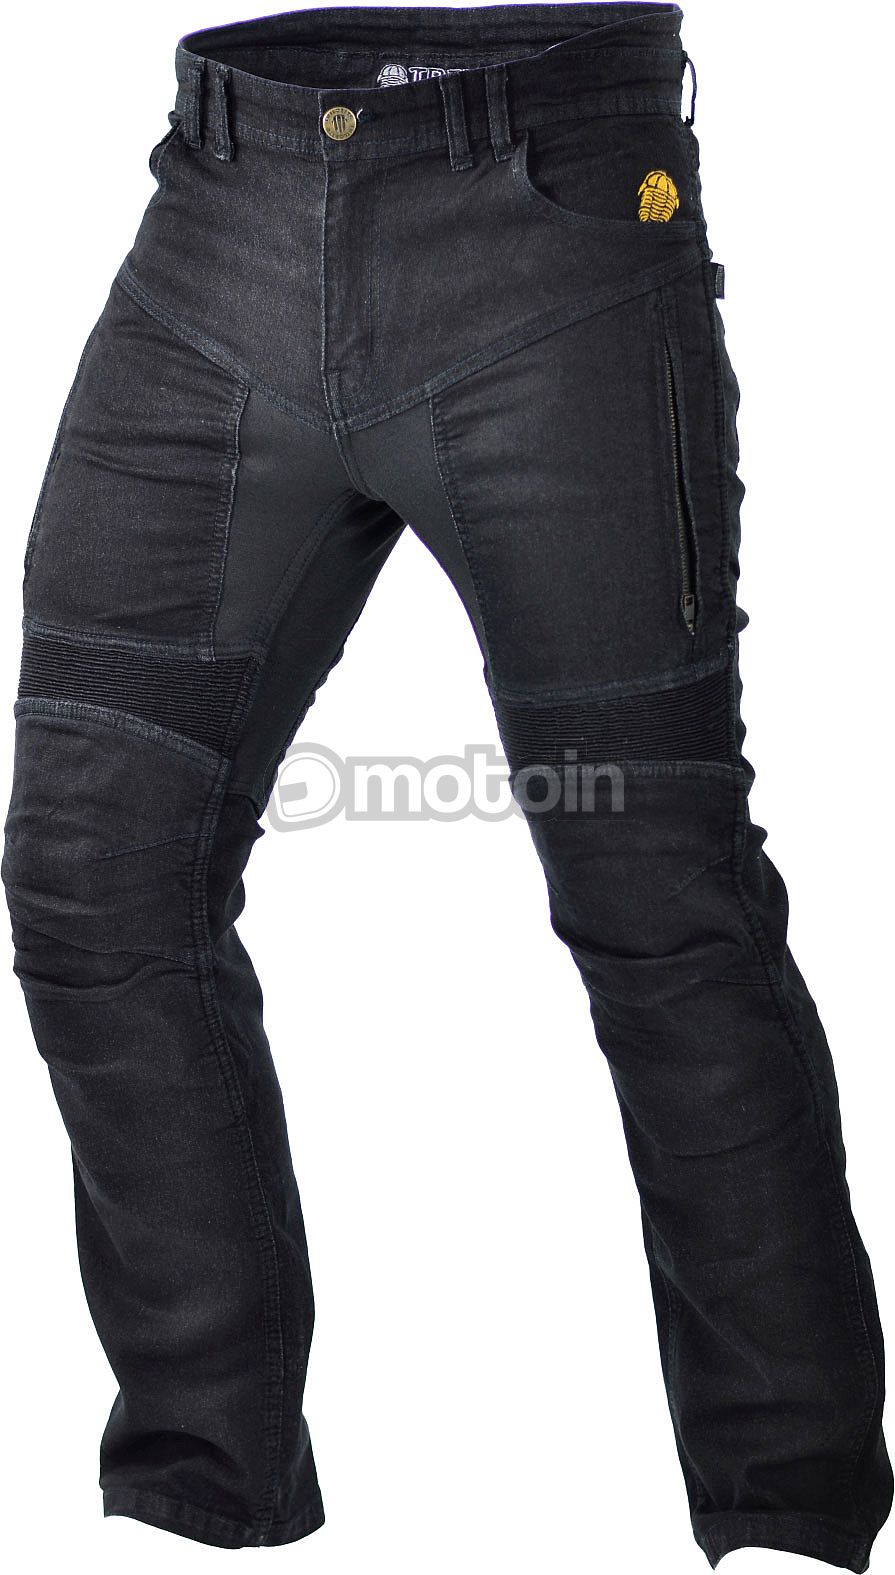 Trilobite Parado Men's Motorcycle Jeans Aramid Jeans with Protector Camouflage 